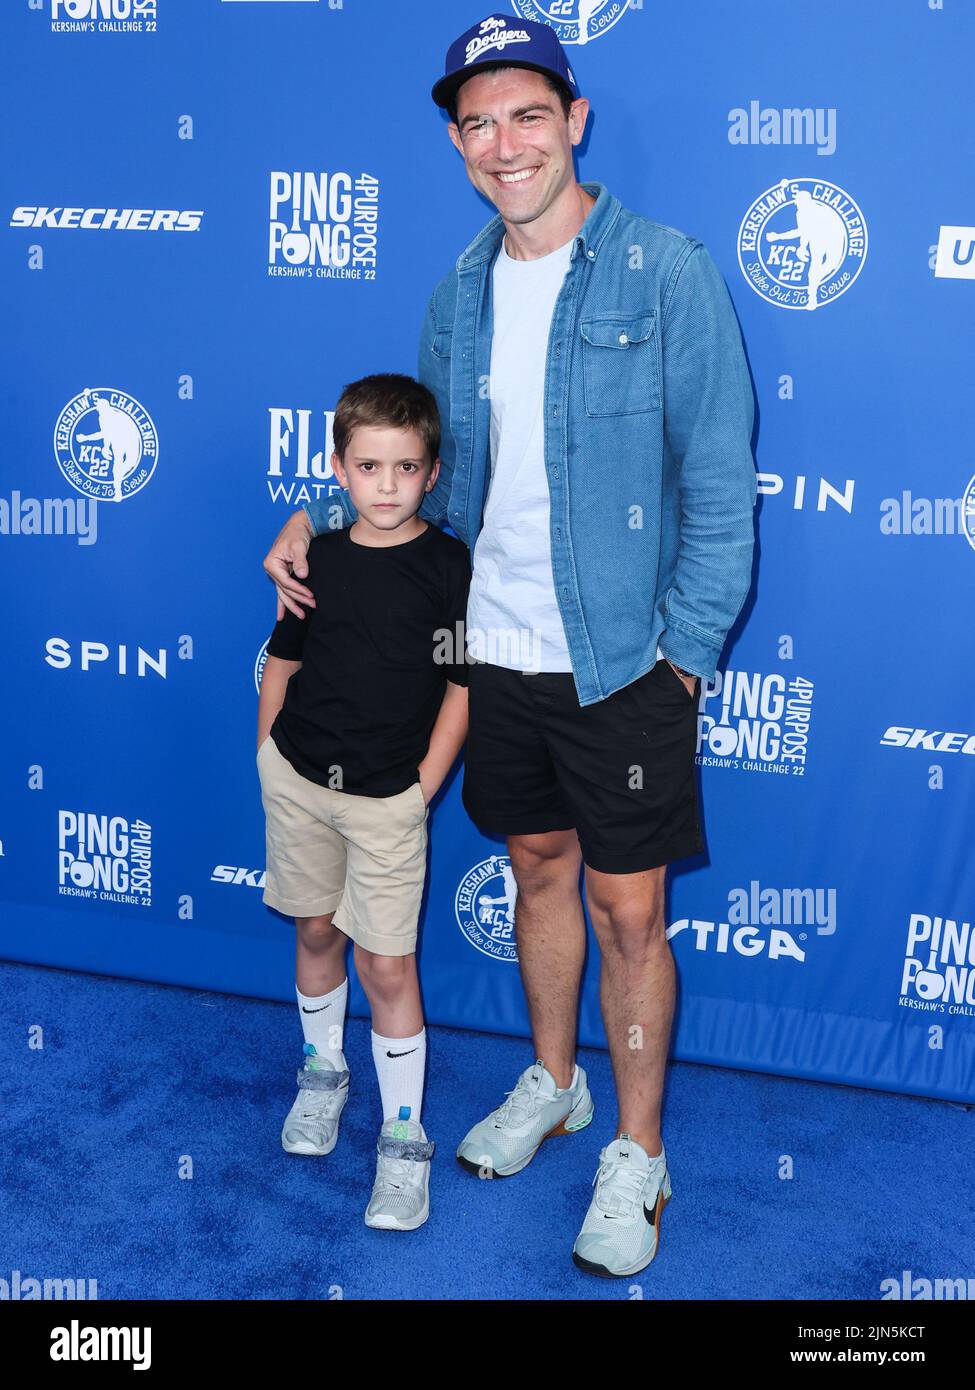 Los Angeles, United States. 08th Aug, 2022. ELYSIAN PARK, LOS ANGELES, CALIFORNIA, USA - AUGUST 08: Ozzie James Greenfield and father/American actor Max Greenfield arrive at Kershaw's Challenge Ping Pong 4 Purpose 2022 held at Dodger Stadium on August 8, 2022 in Elysian Park, Los Angeles, California, United States. (Photo by Xavier Collin/Image Press Agency) Credit: Image Press Agency/Alamy Live News Stock Photo